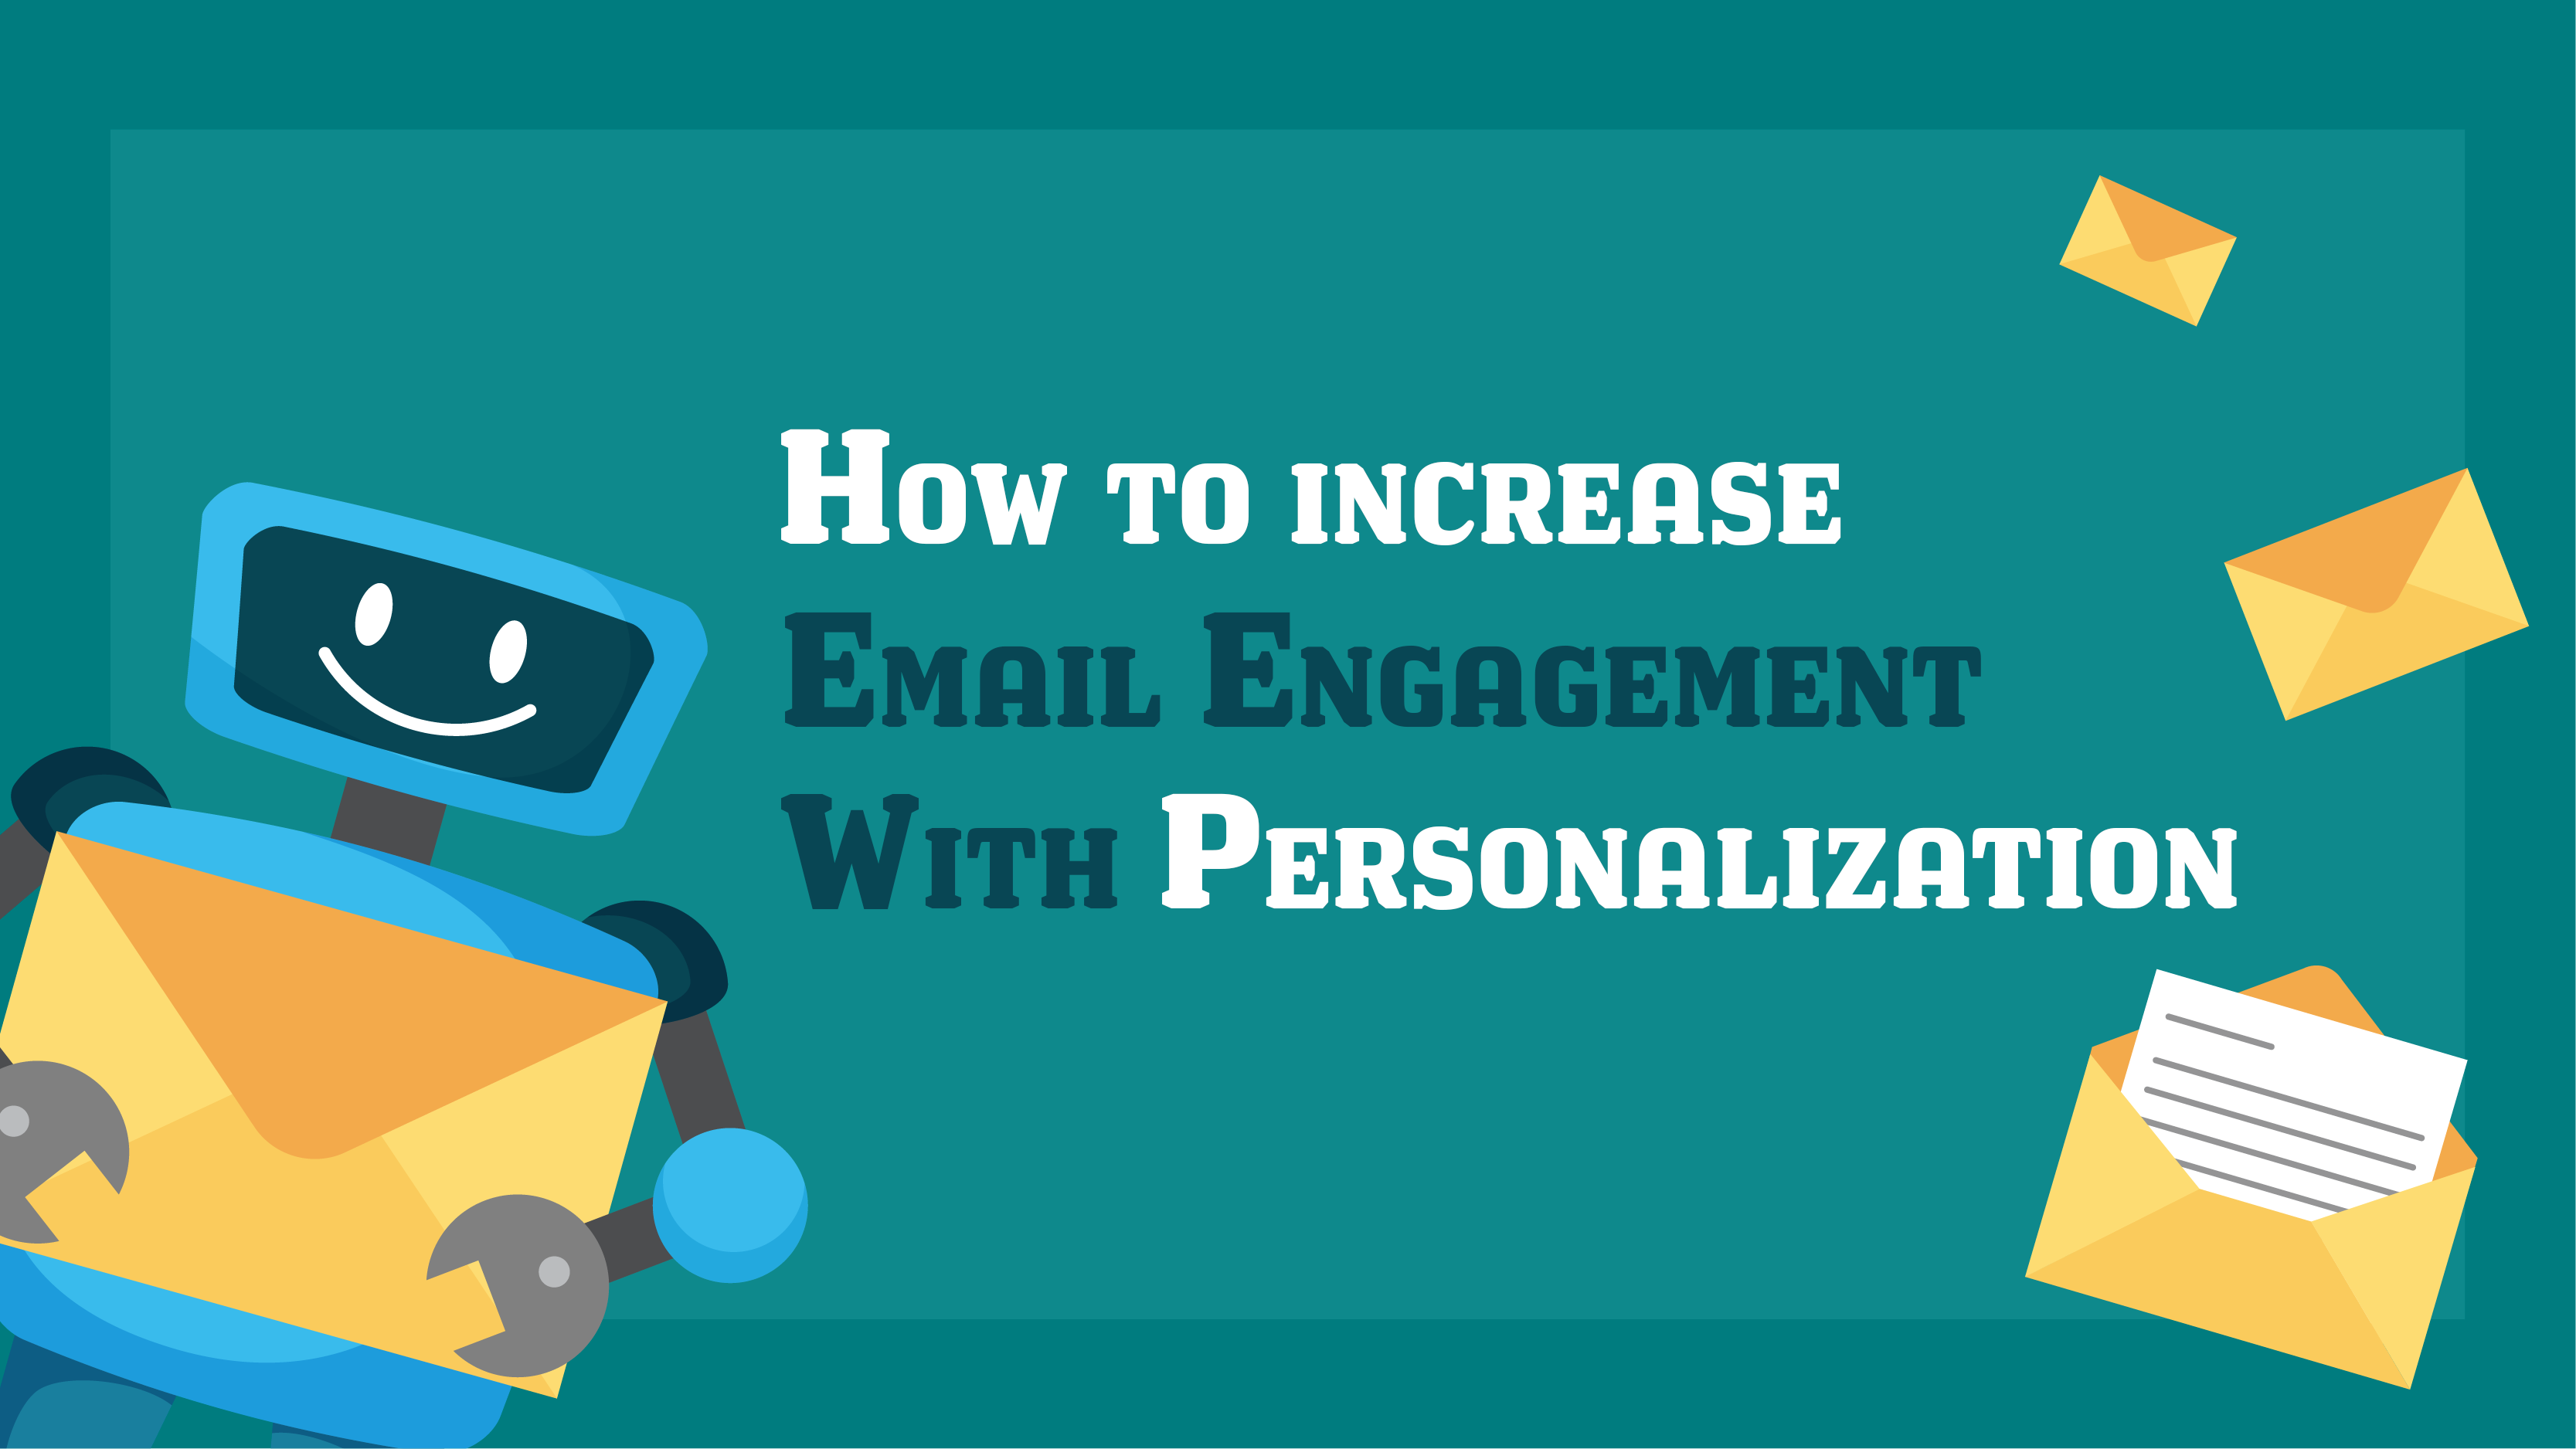 How to Increase Email Engagement with Personalization